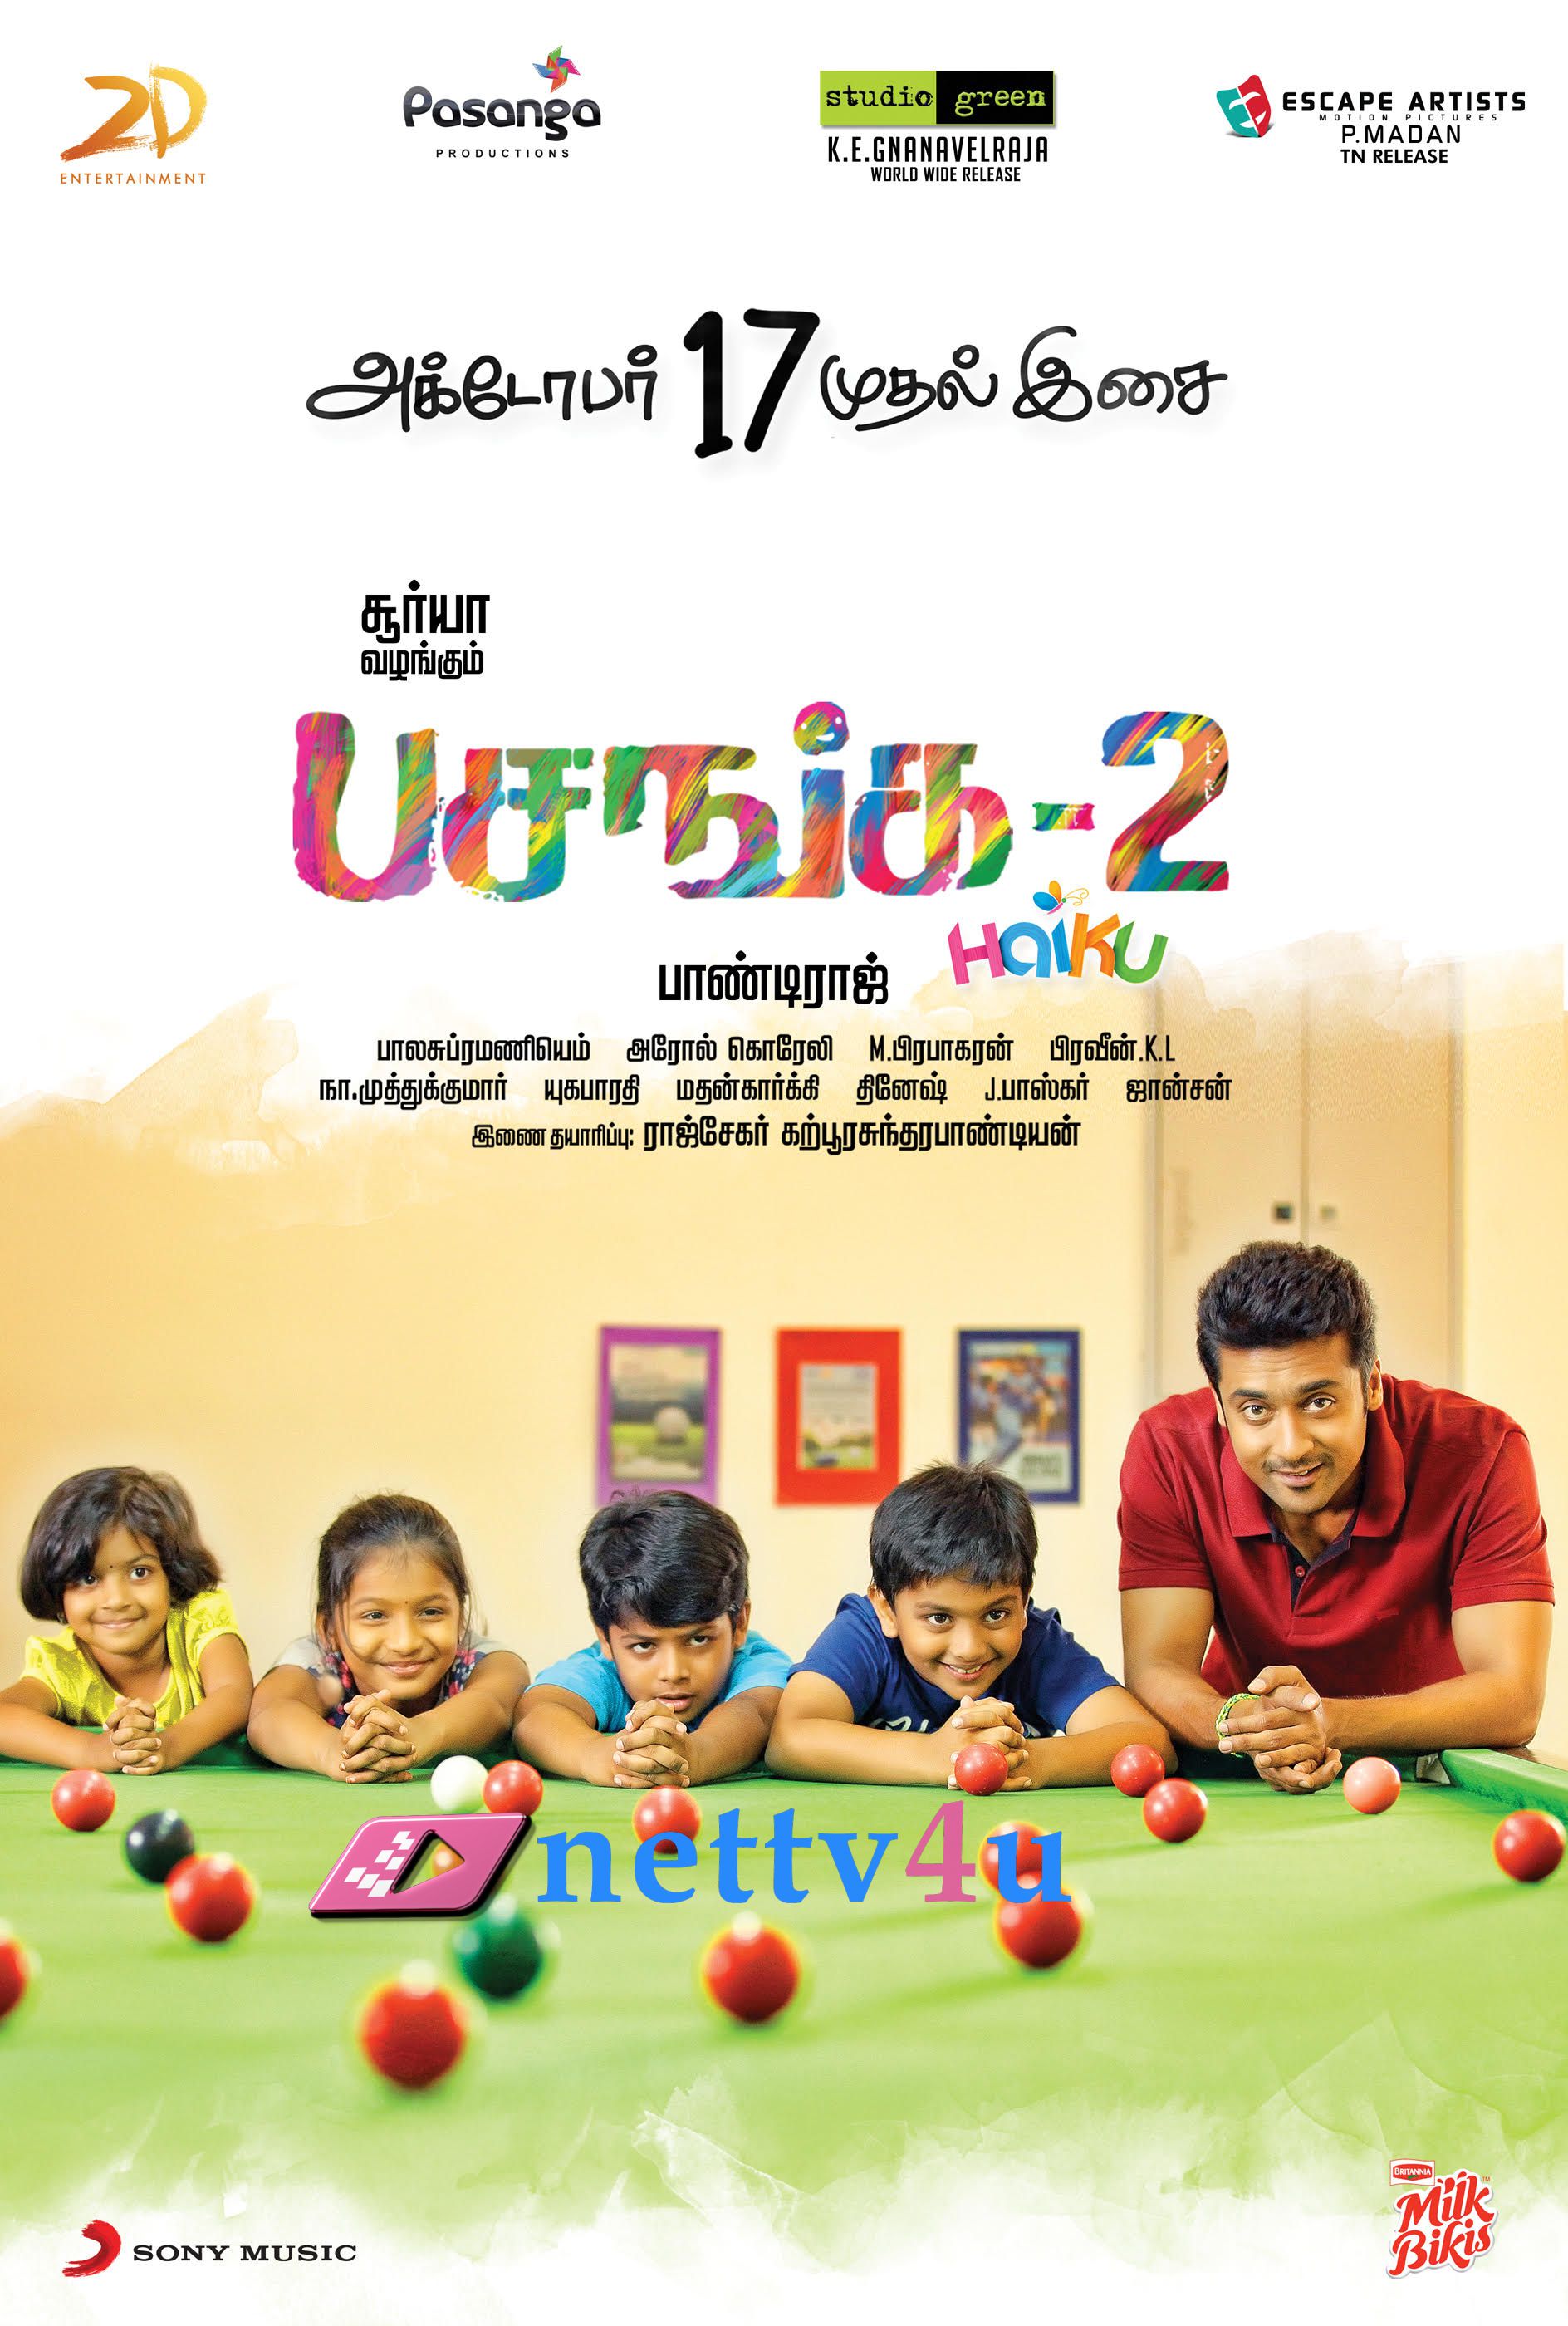 haiku movie stills and posters first look 3